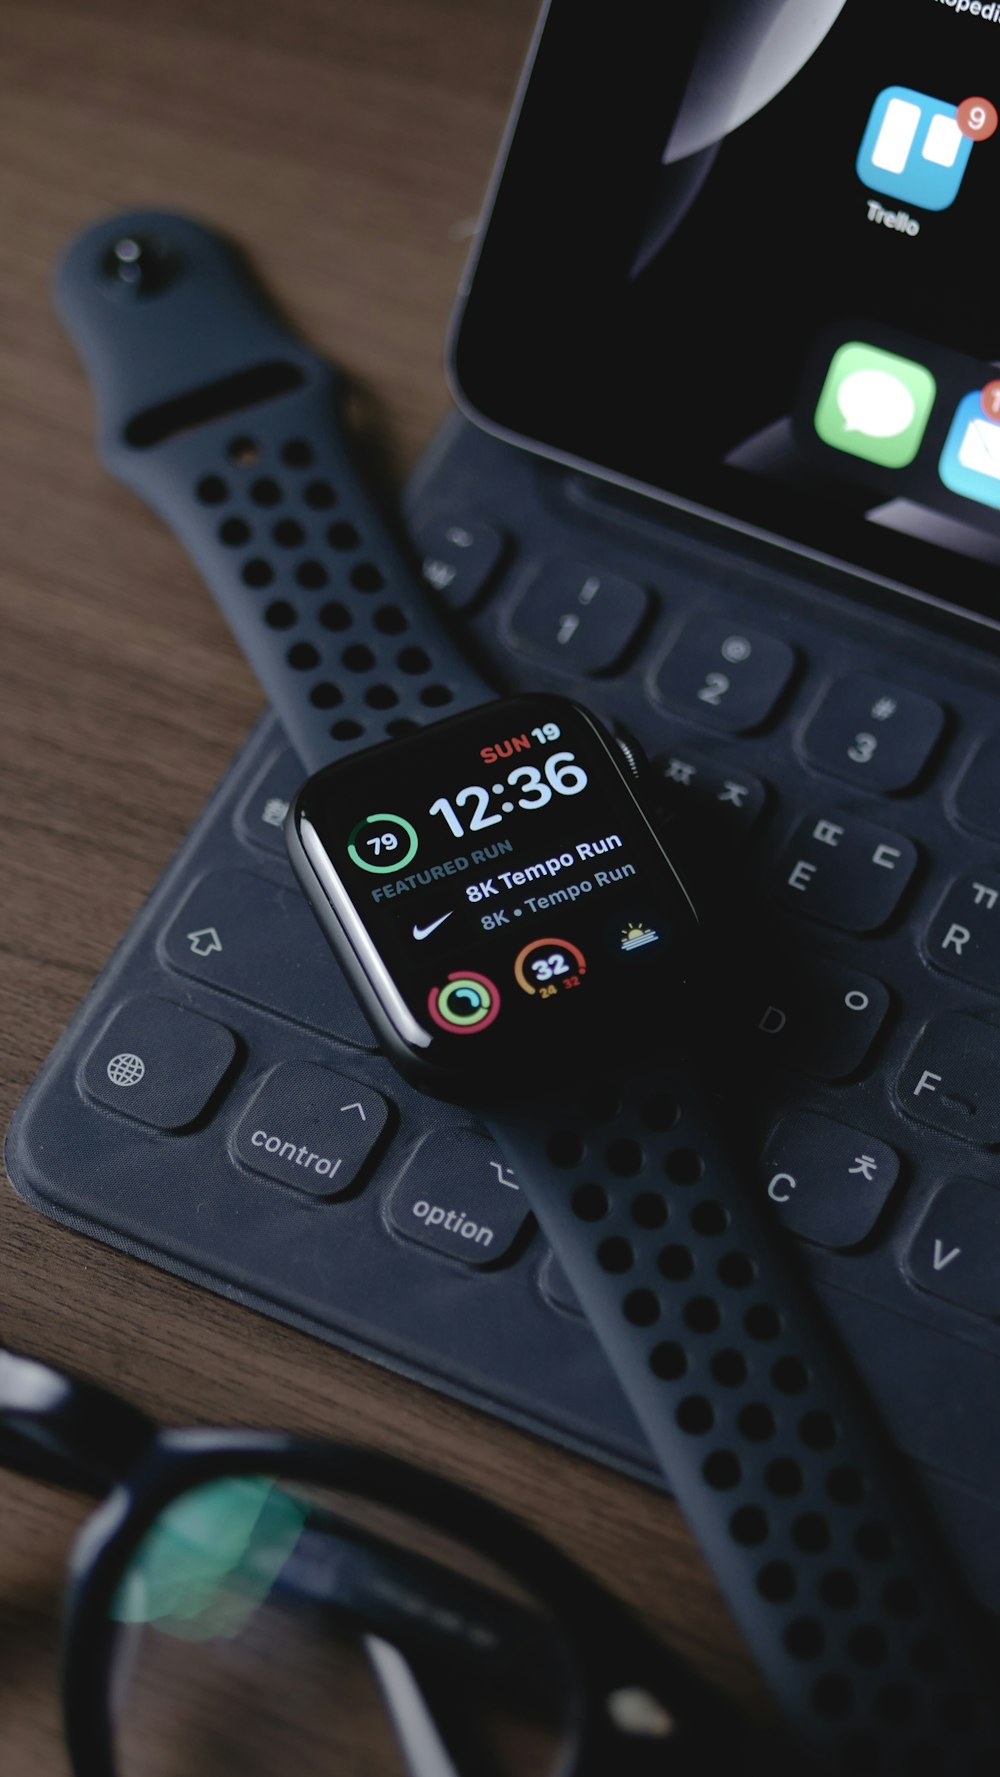 Apple Watch Series 5 Pictures | Download Free Images on Unsplash